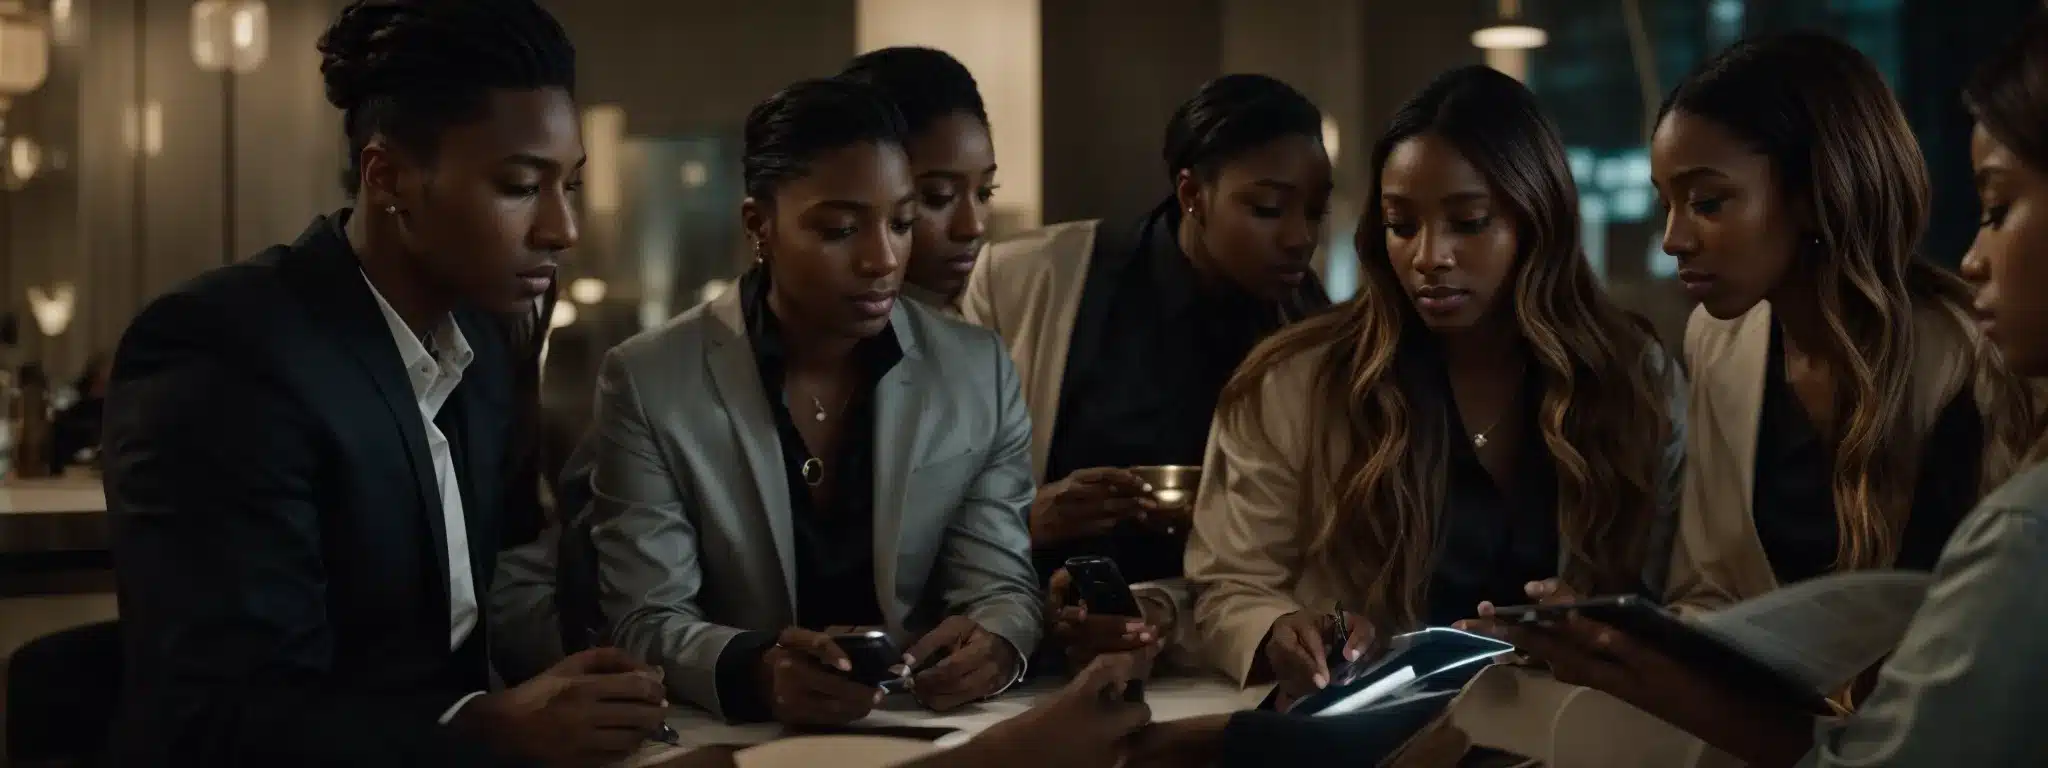 A Diverse Group Of Fashion-Savvy Individuals Gather Around A Sleek, Modern Table, Their Focused Expressions Illuminated By The Soft Glow Of Their Digital Devices As They Strategize Their Next Collaborative Campaign.